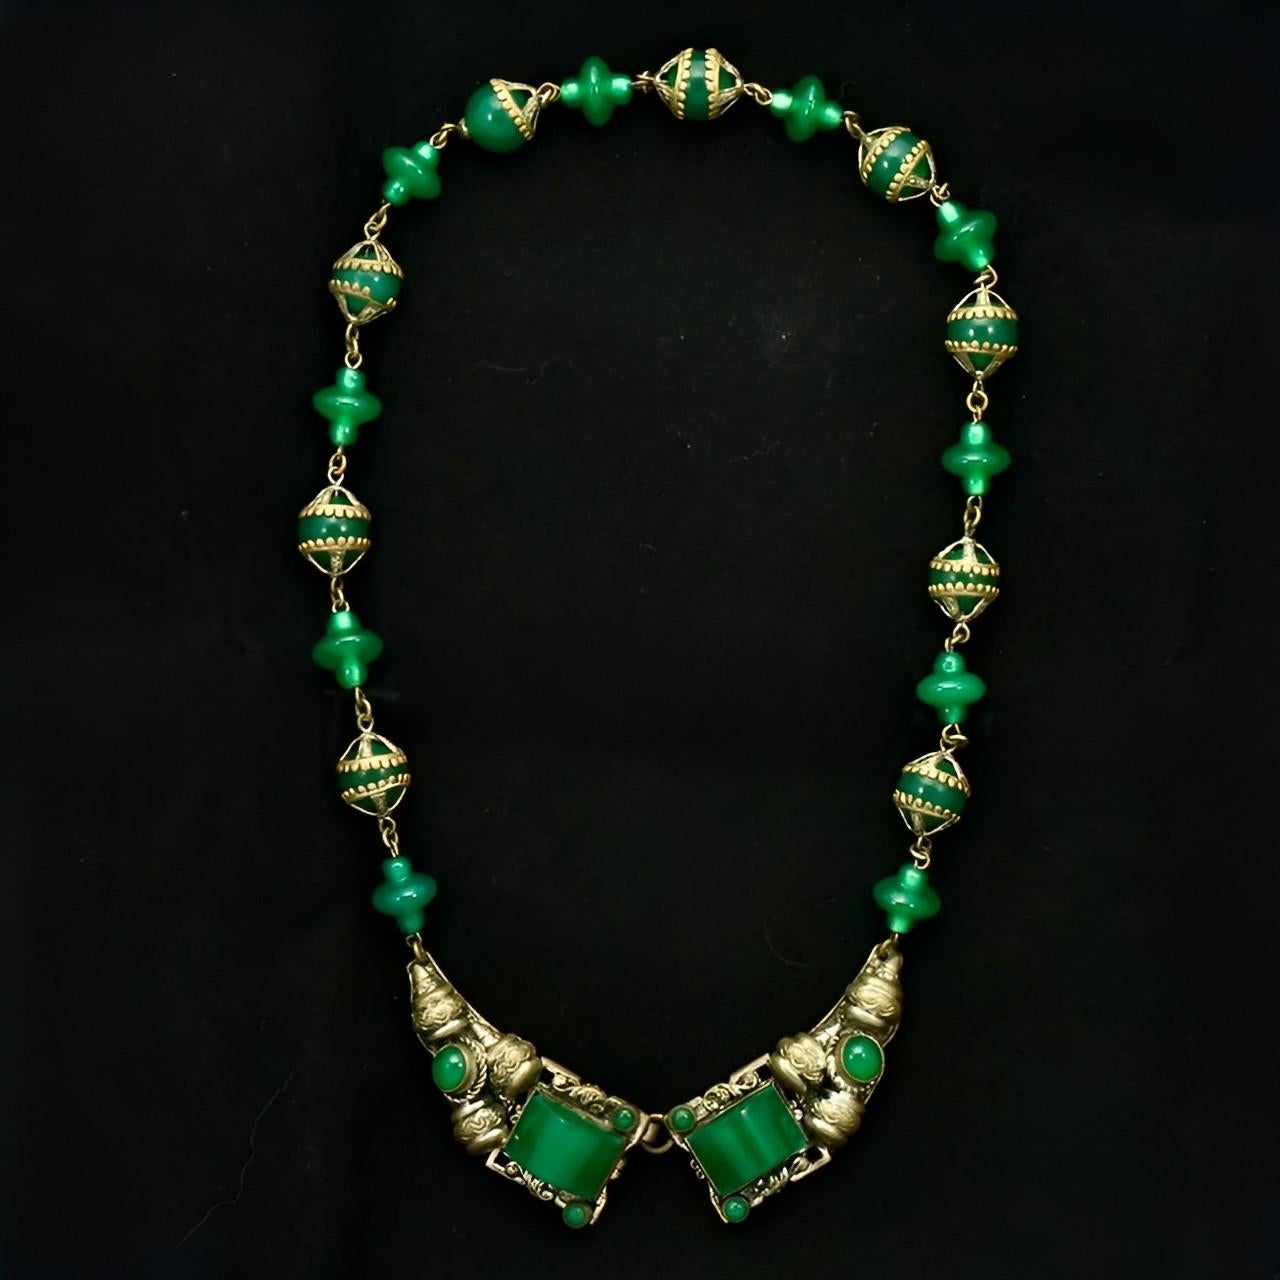 Czech Silver Plated and Green Glass Necklace circa 1930s 2